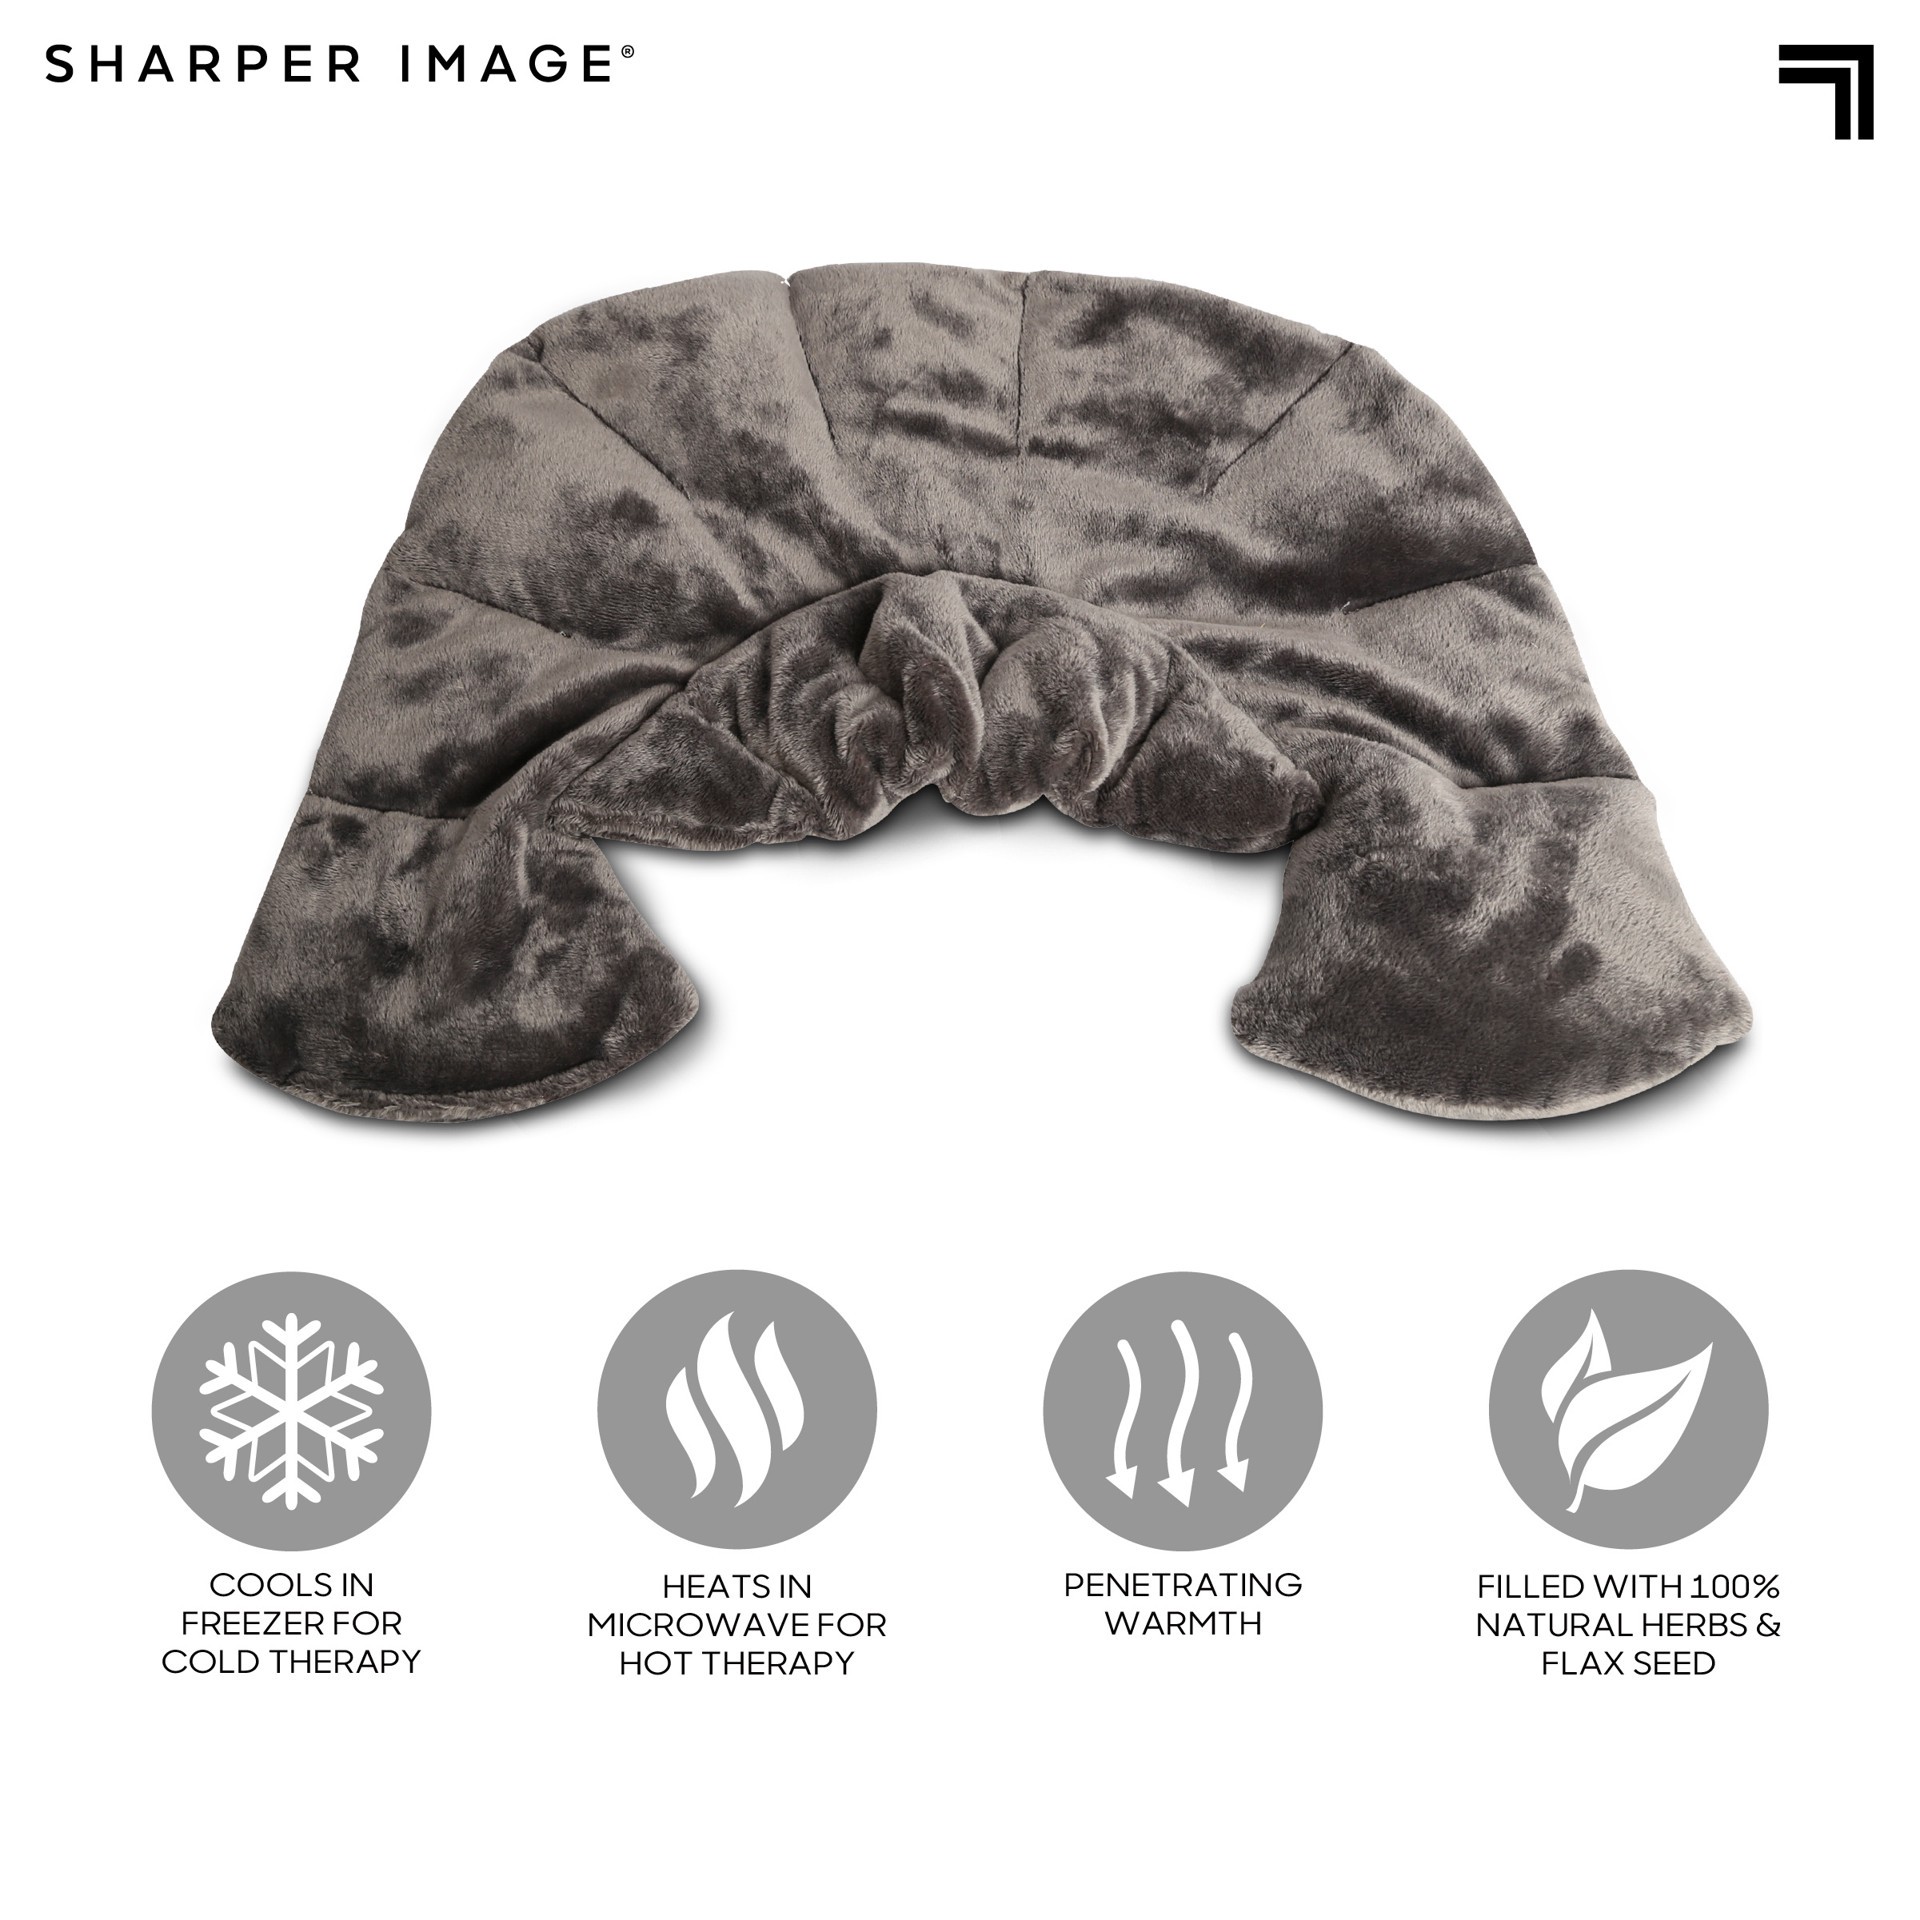 slide 6 of 8, Sharper Image Hot & Cold Herbal Aromatherapy Neck & Shoulder Plush Wrap Pad for Soothing Muscle Pain and Tension Relief Therapy, 100% Natural Lavender & Herb Spa Blend, Use in Microwave or Freezer, 1 ct